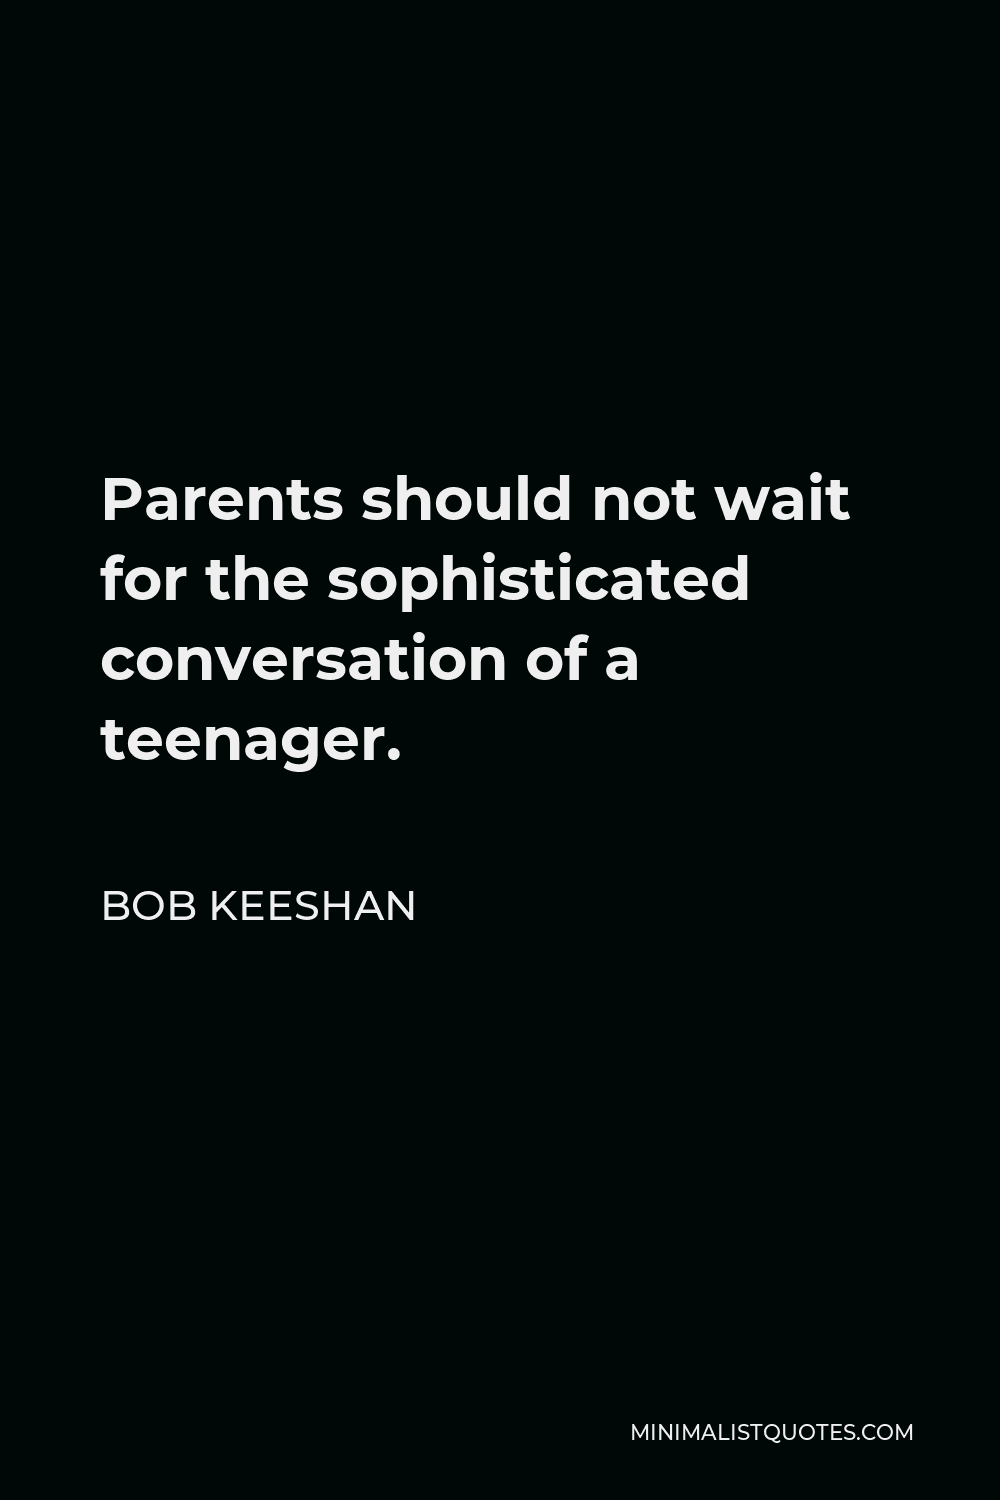 Bob Keeshan Quote - Parents should not wait for the sophisticated conversation of a teenager.